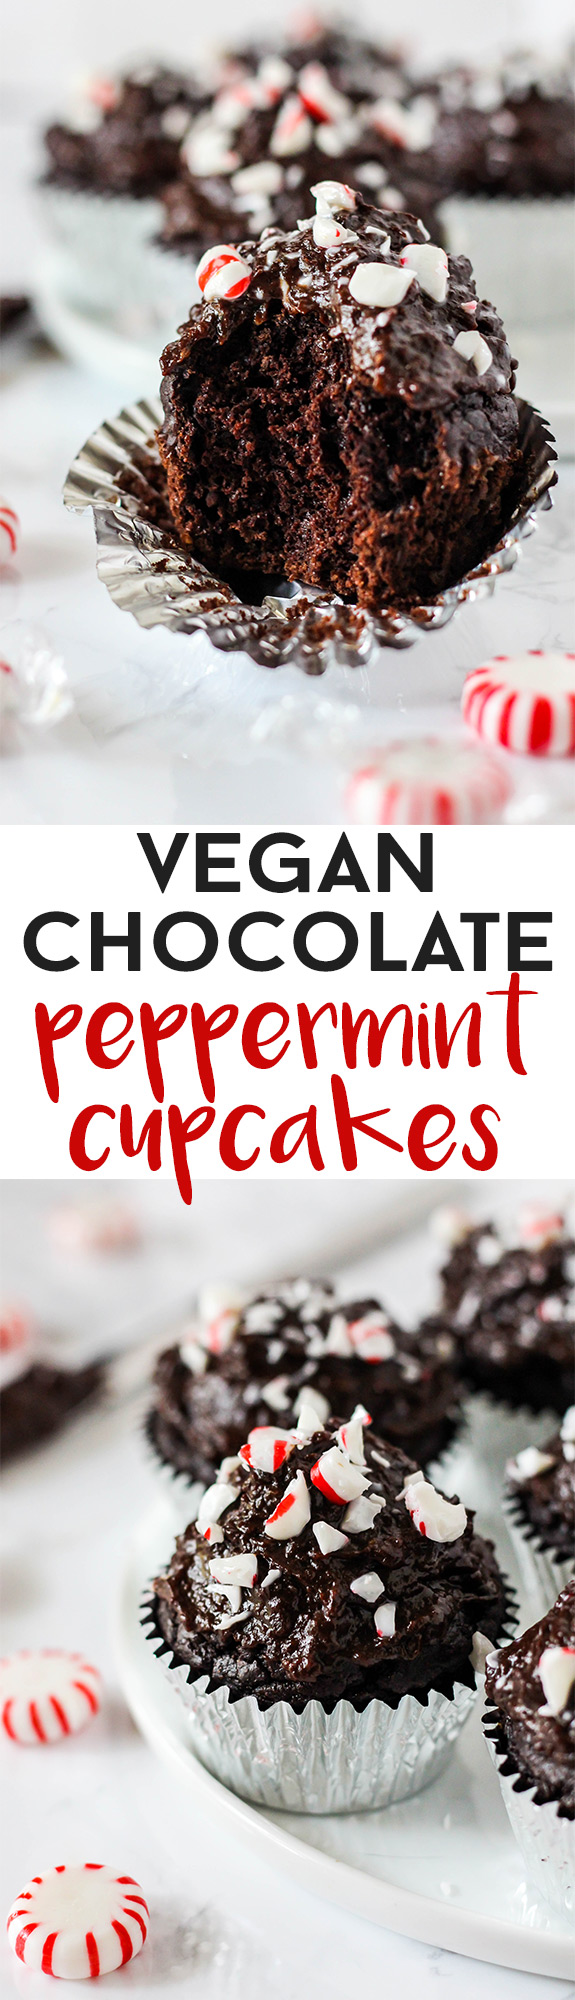 These fluffy, oil-free Vegan Chocolate Peppermint Cupcakes are the ultimate holiday dessert. They're topped with a naturally sweet chocolate date frosting!